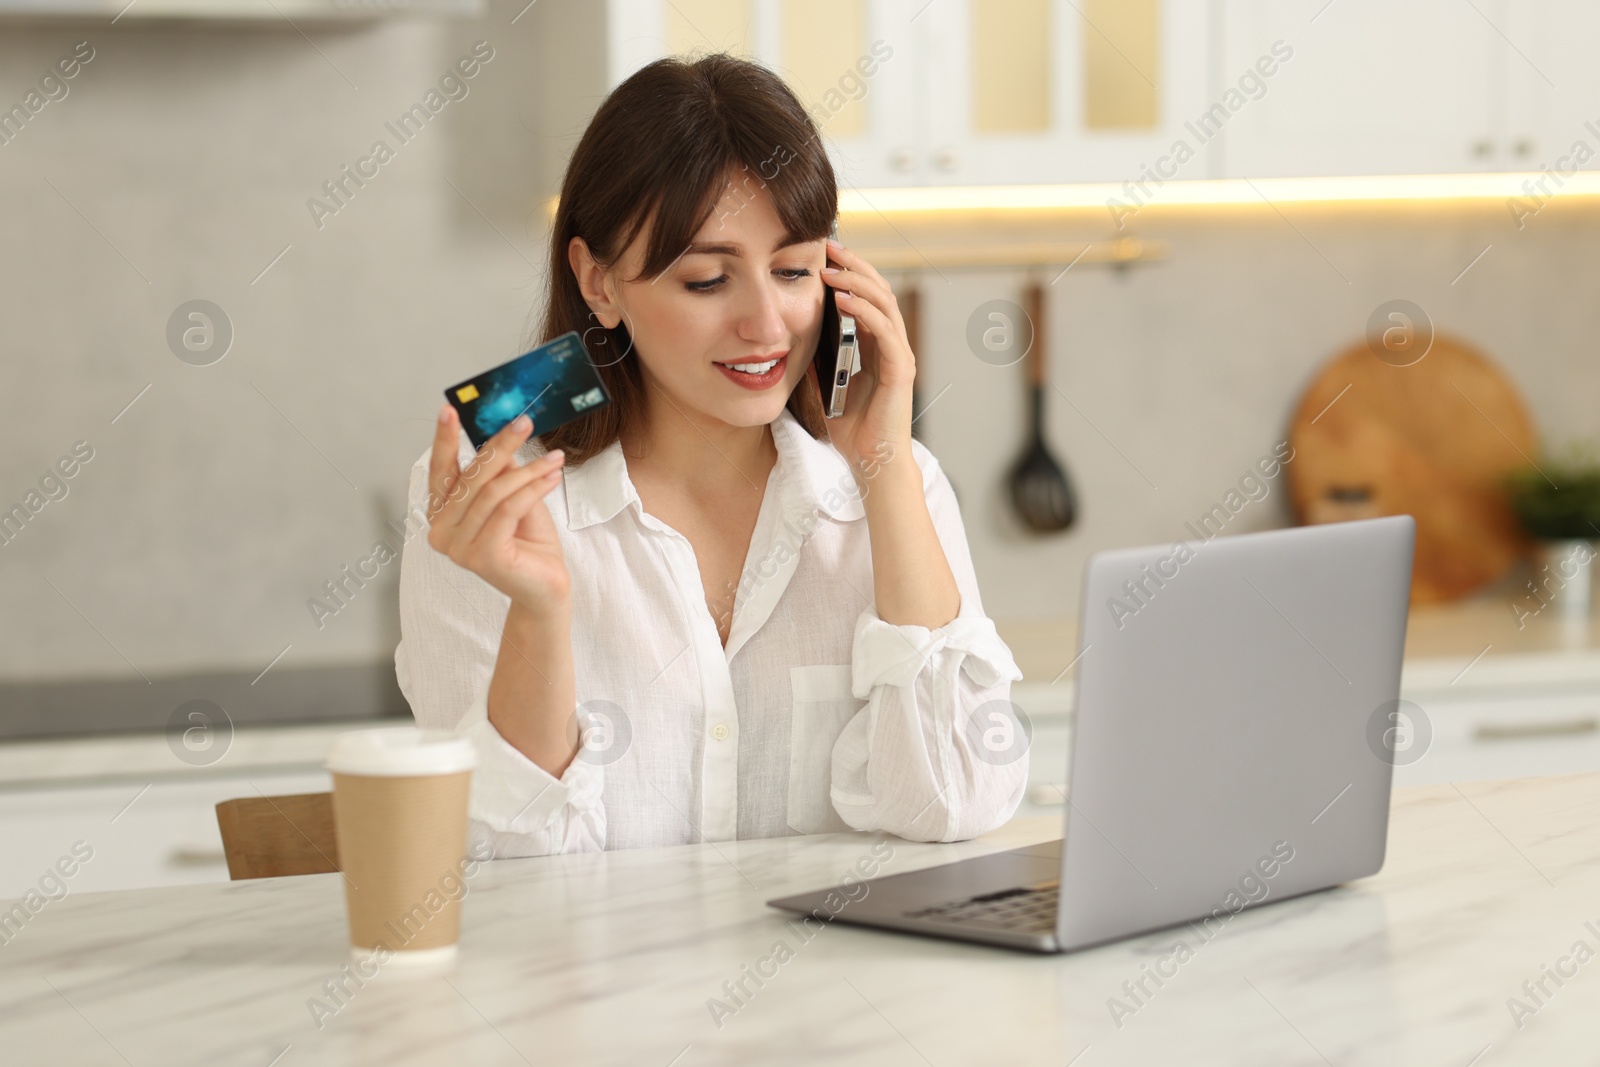 Photo of Online banking. Smiling woman with credit card talking by smartphone at table indoors